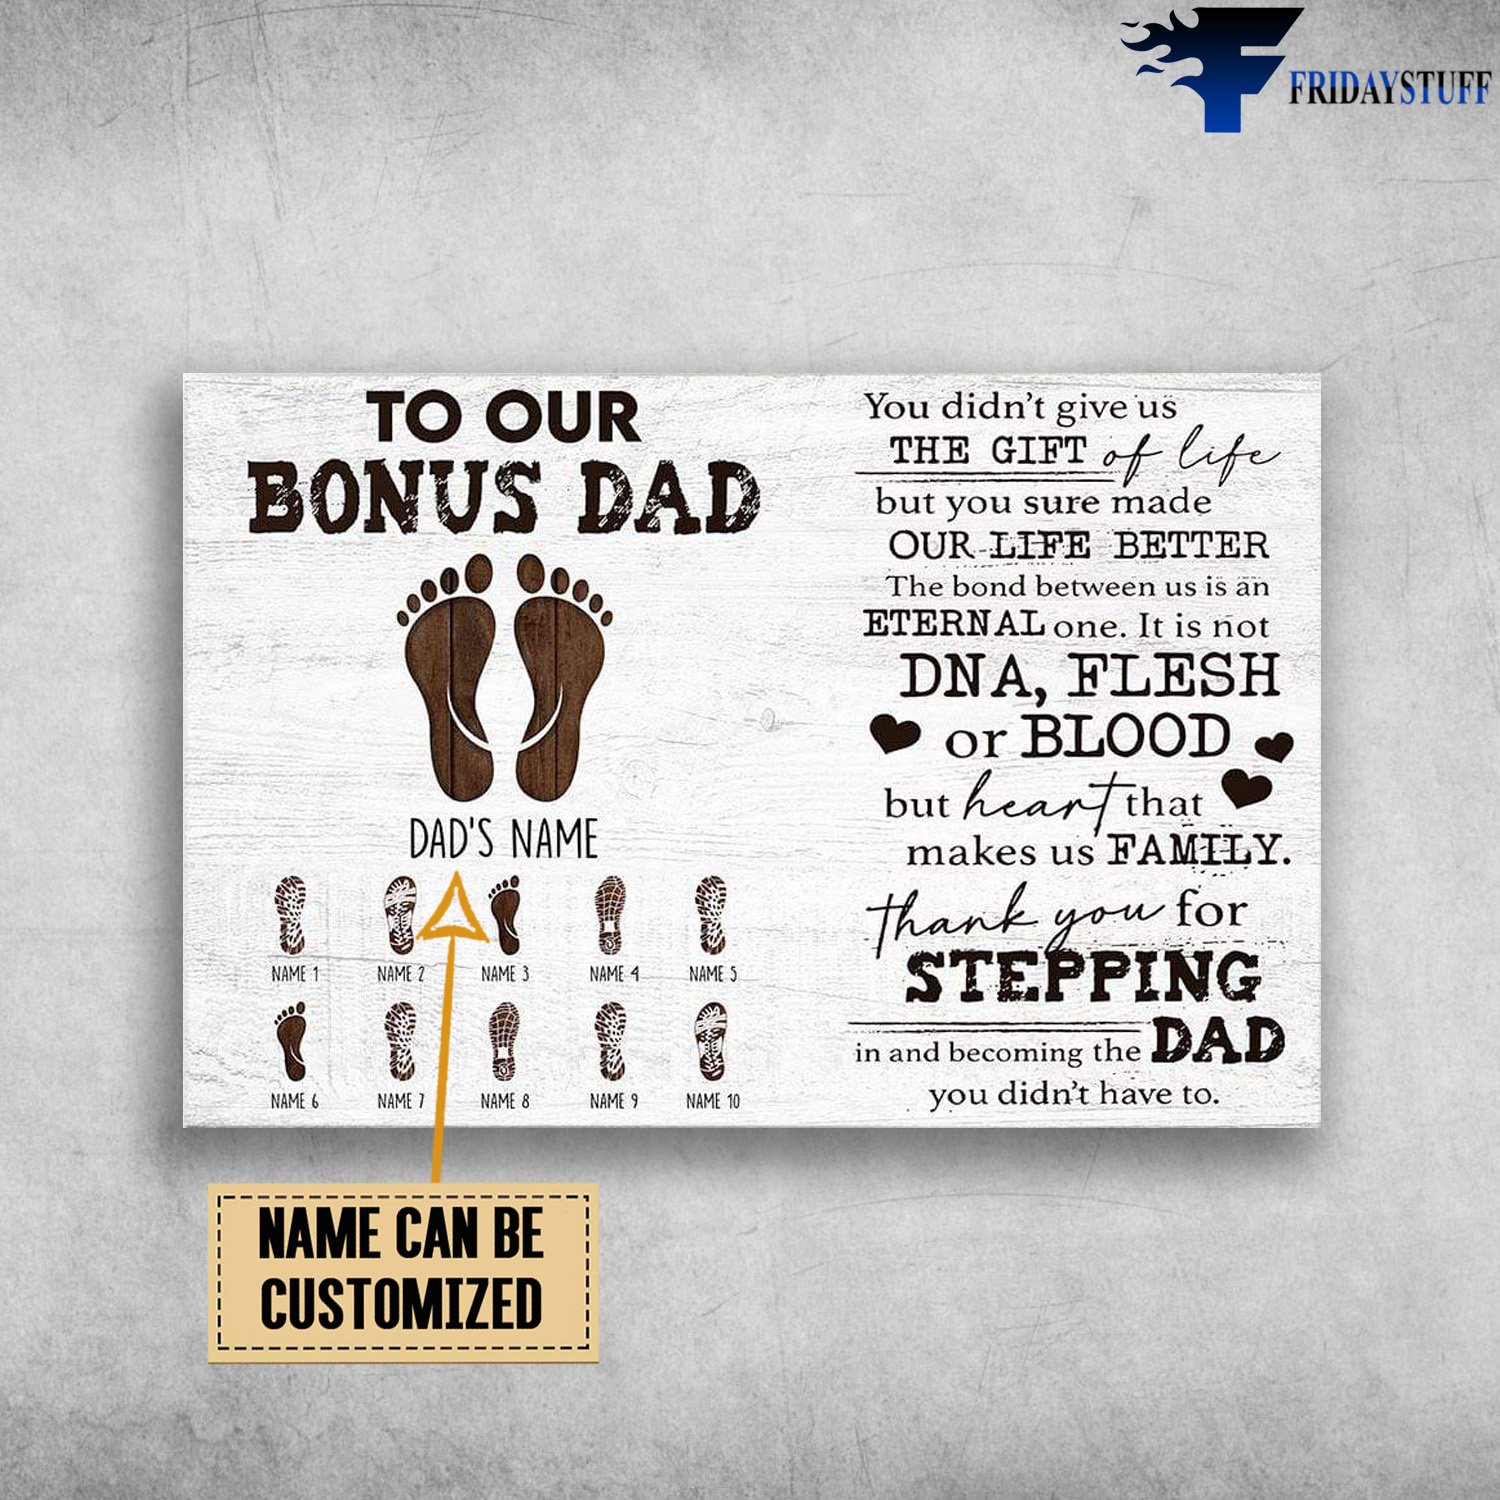 Dad's Feet, To Our Bonus Dad, You Didn't Give Up, The Gife Of Life, But You Sure Made Our Life Better, The Bond Between Us, Is An Eternal One, It Is Not DNA, Flesh Of Blood, But Heart That Makes Us Family, Stepping Dad